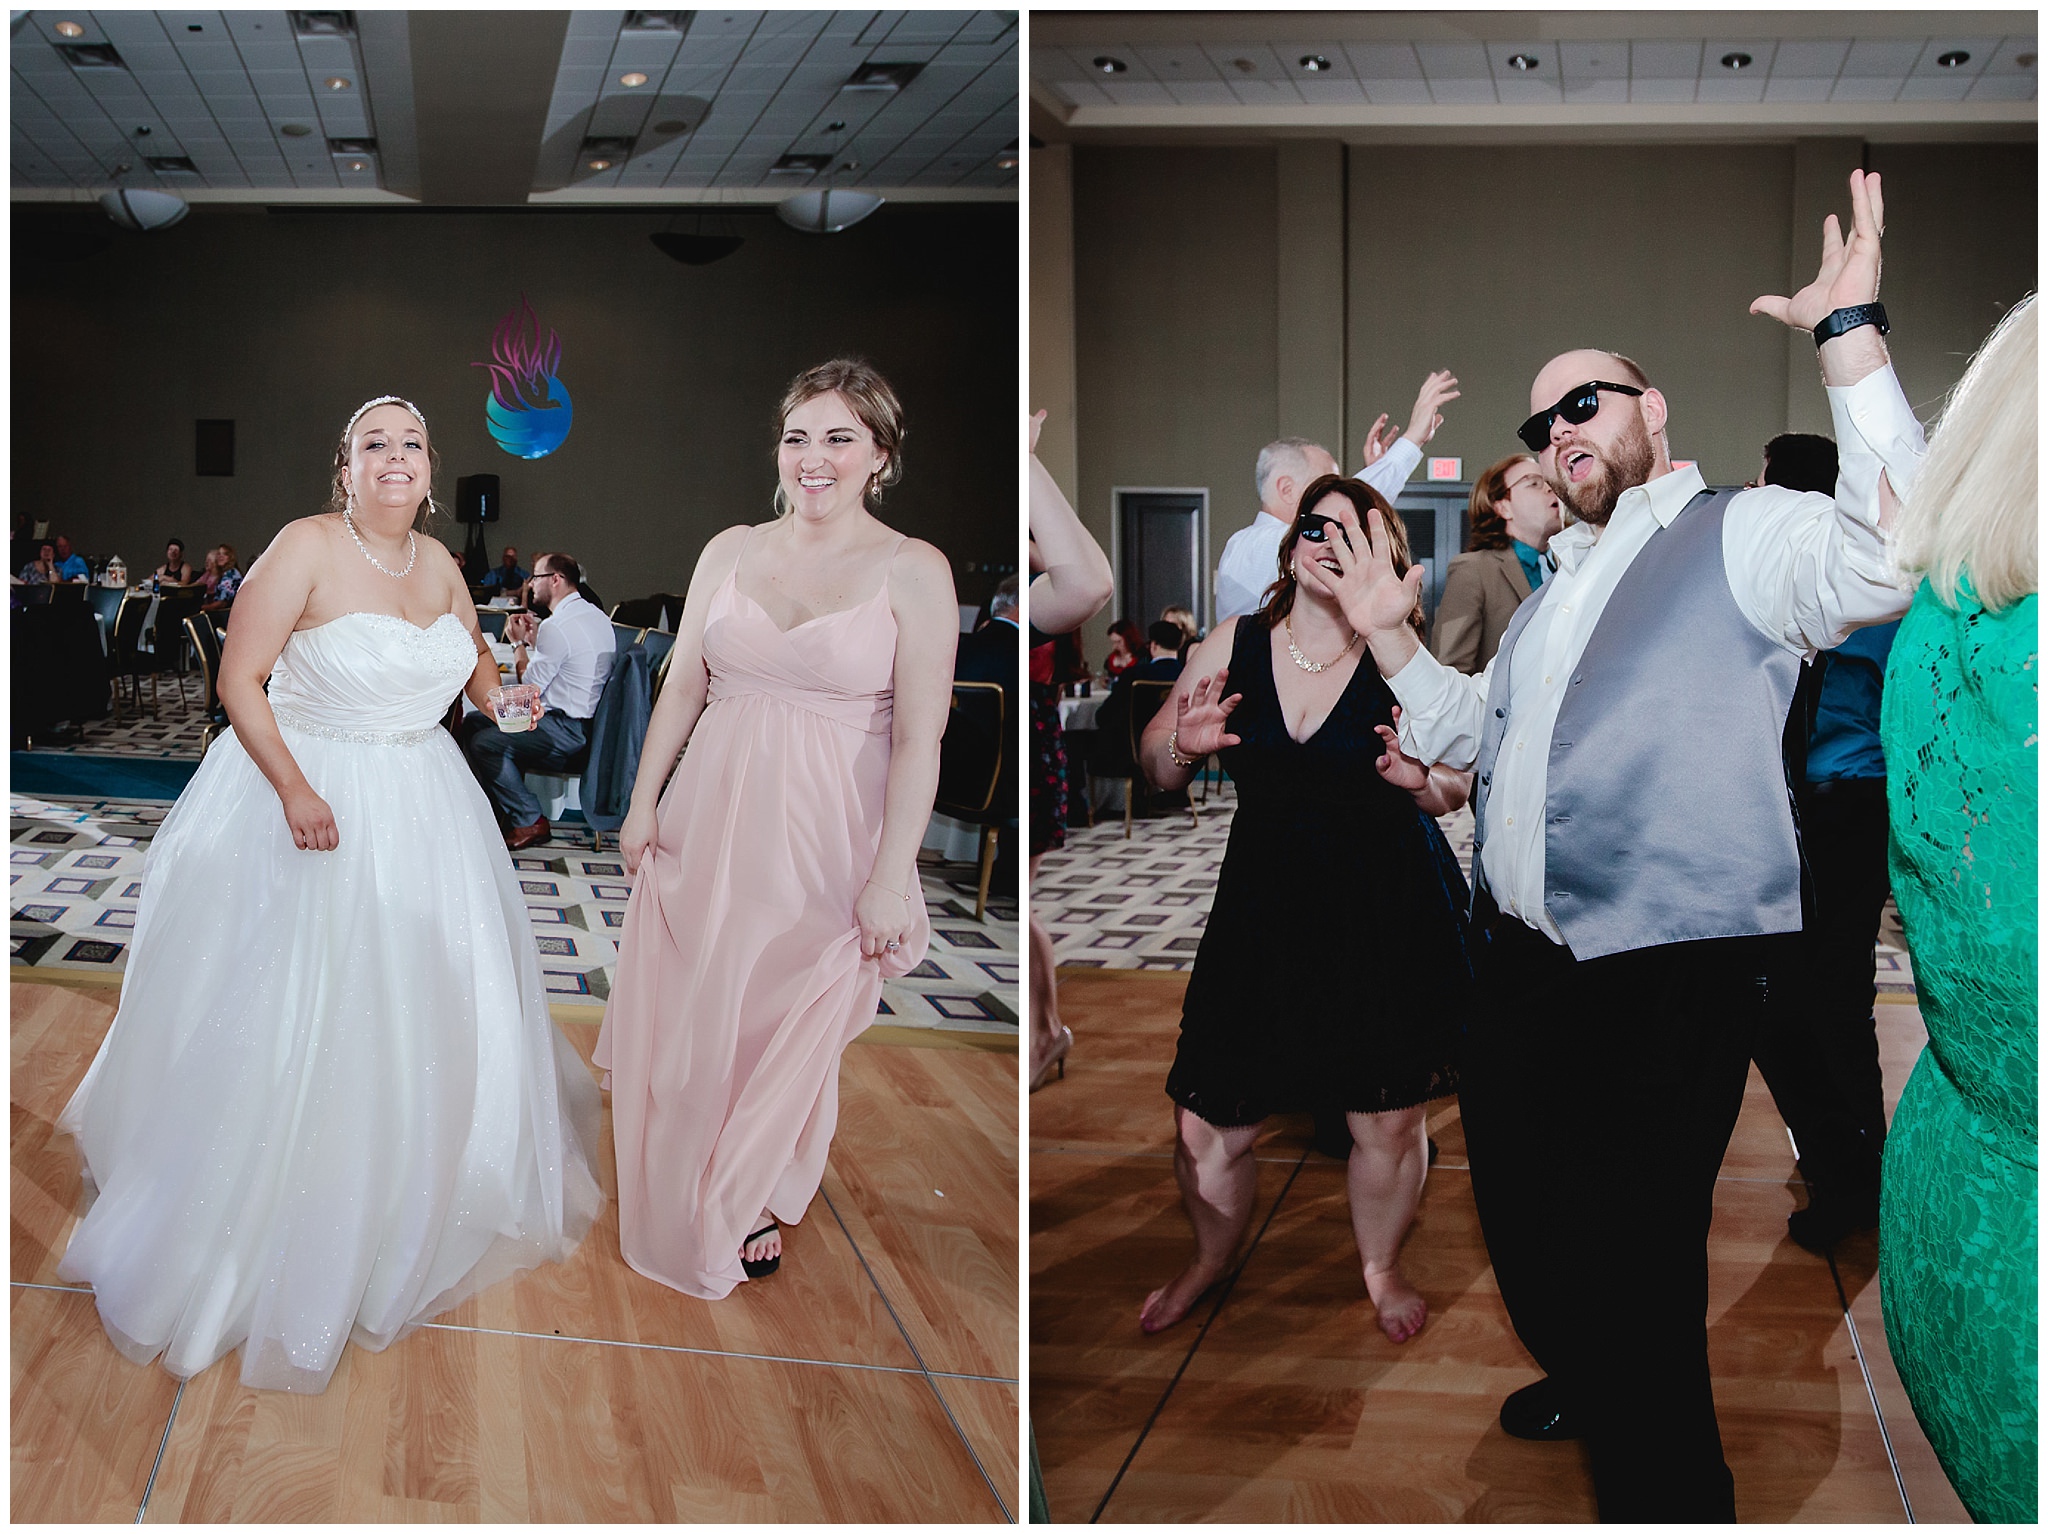 Wedding guests having fun on the dance floor at Duquesne University